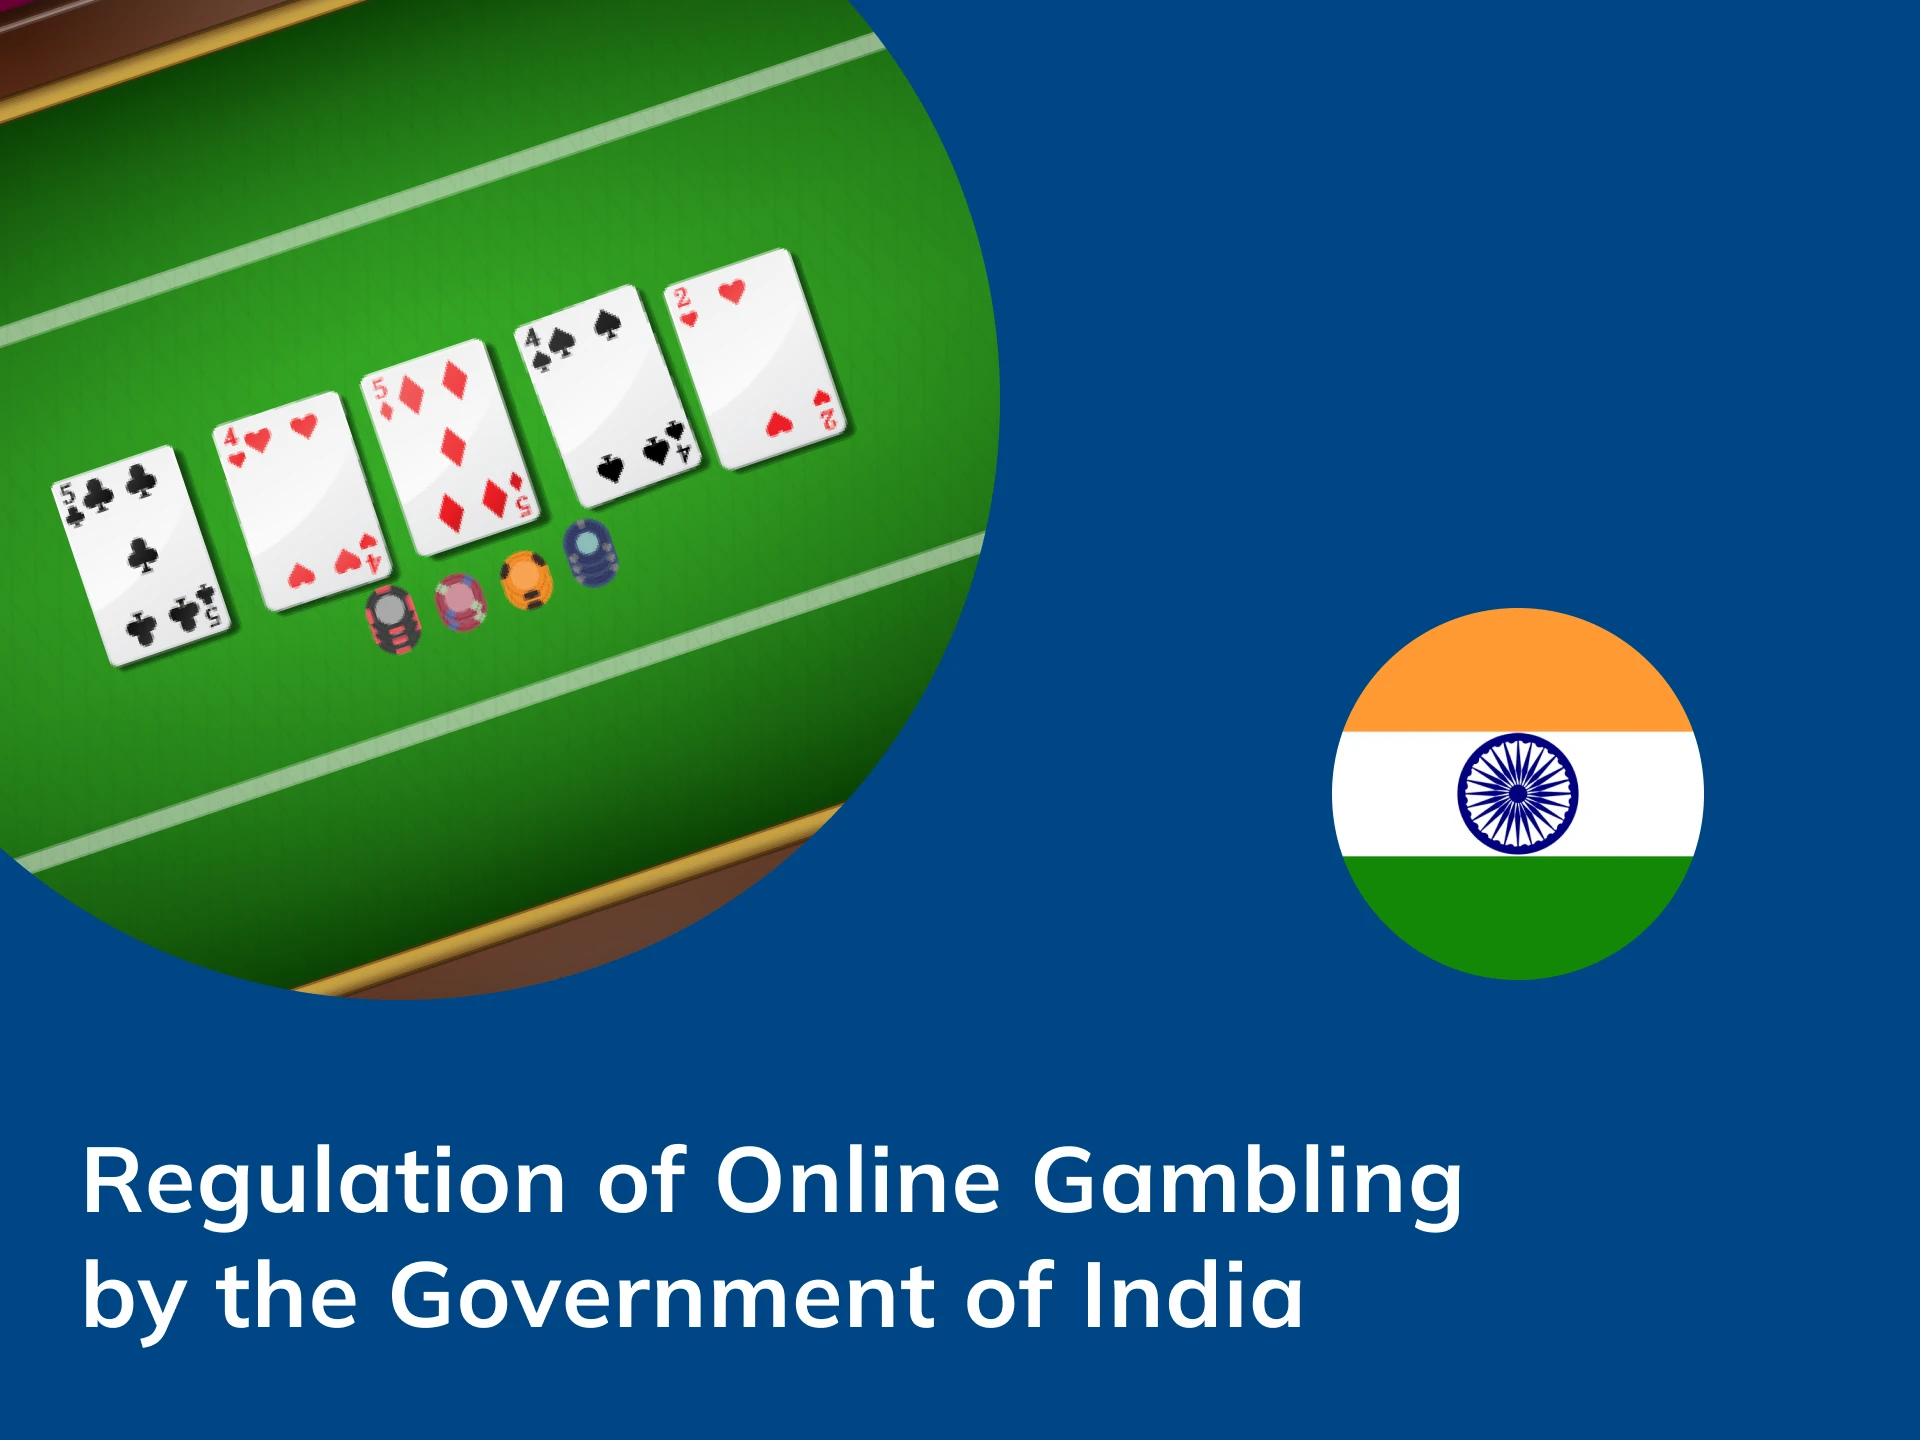 New Rules and Regulations by the Indian Government are already presented to betting companies.